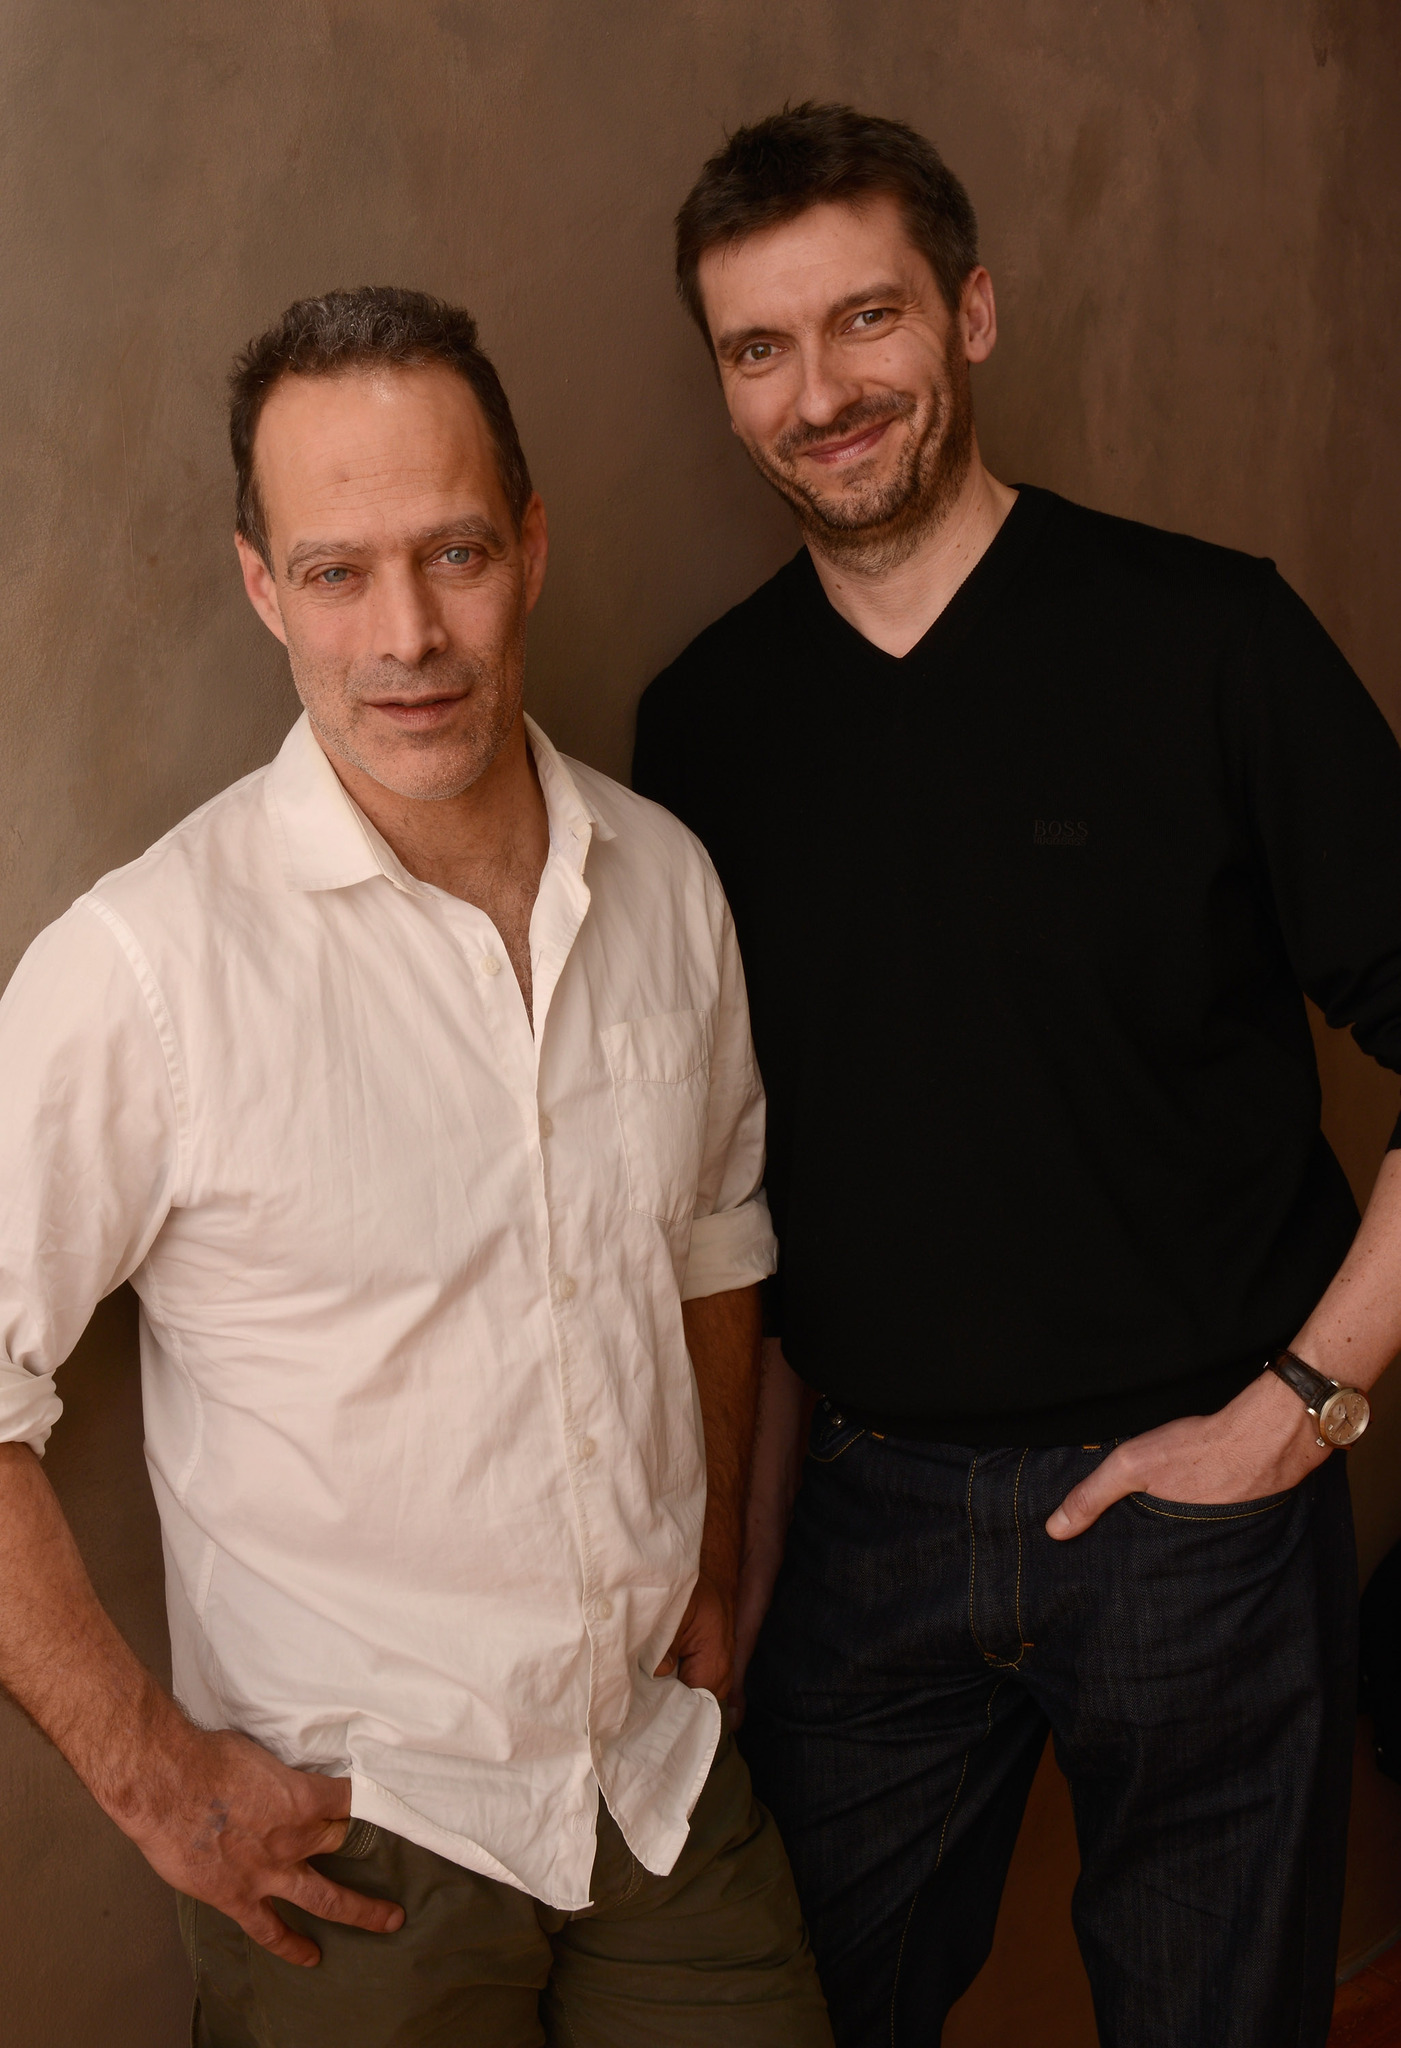 Sebastian Junger and James Brabazon at event of Which Way Is the Front Line from Here? The Life and Time of Tim Hetherington (2013)